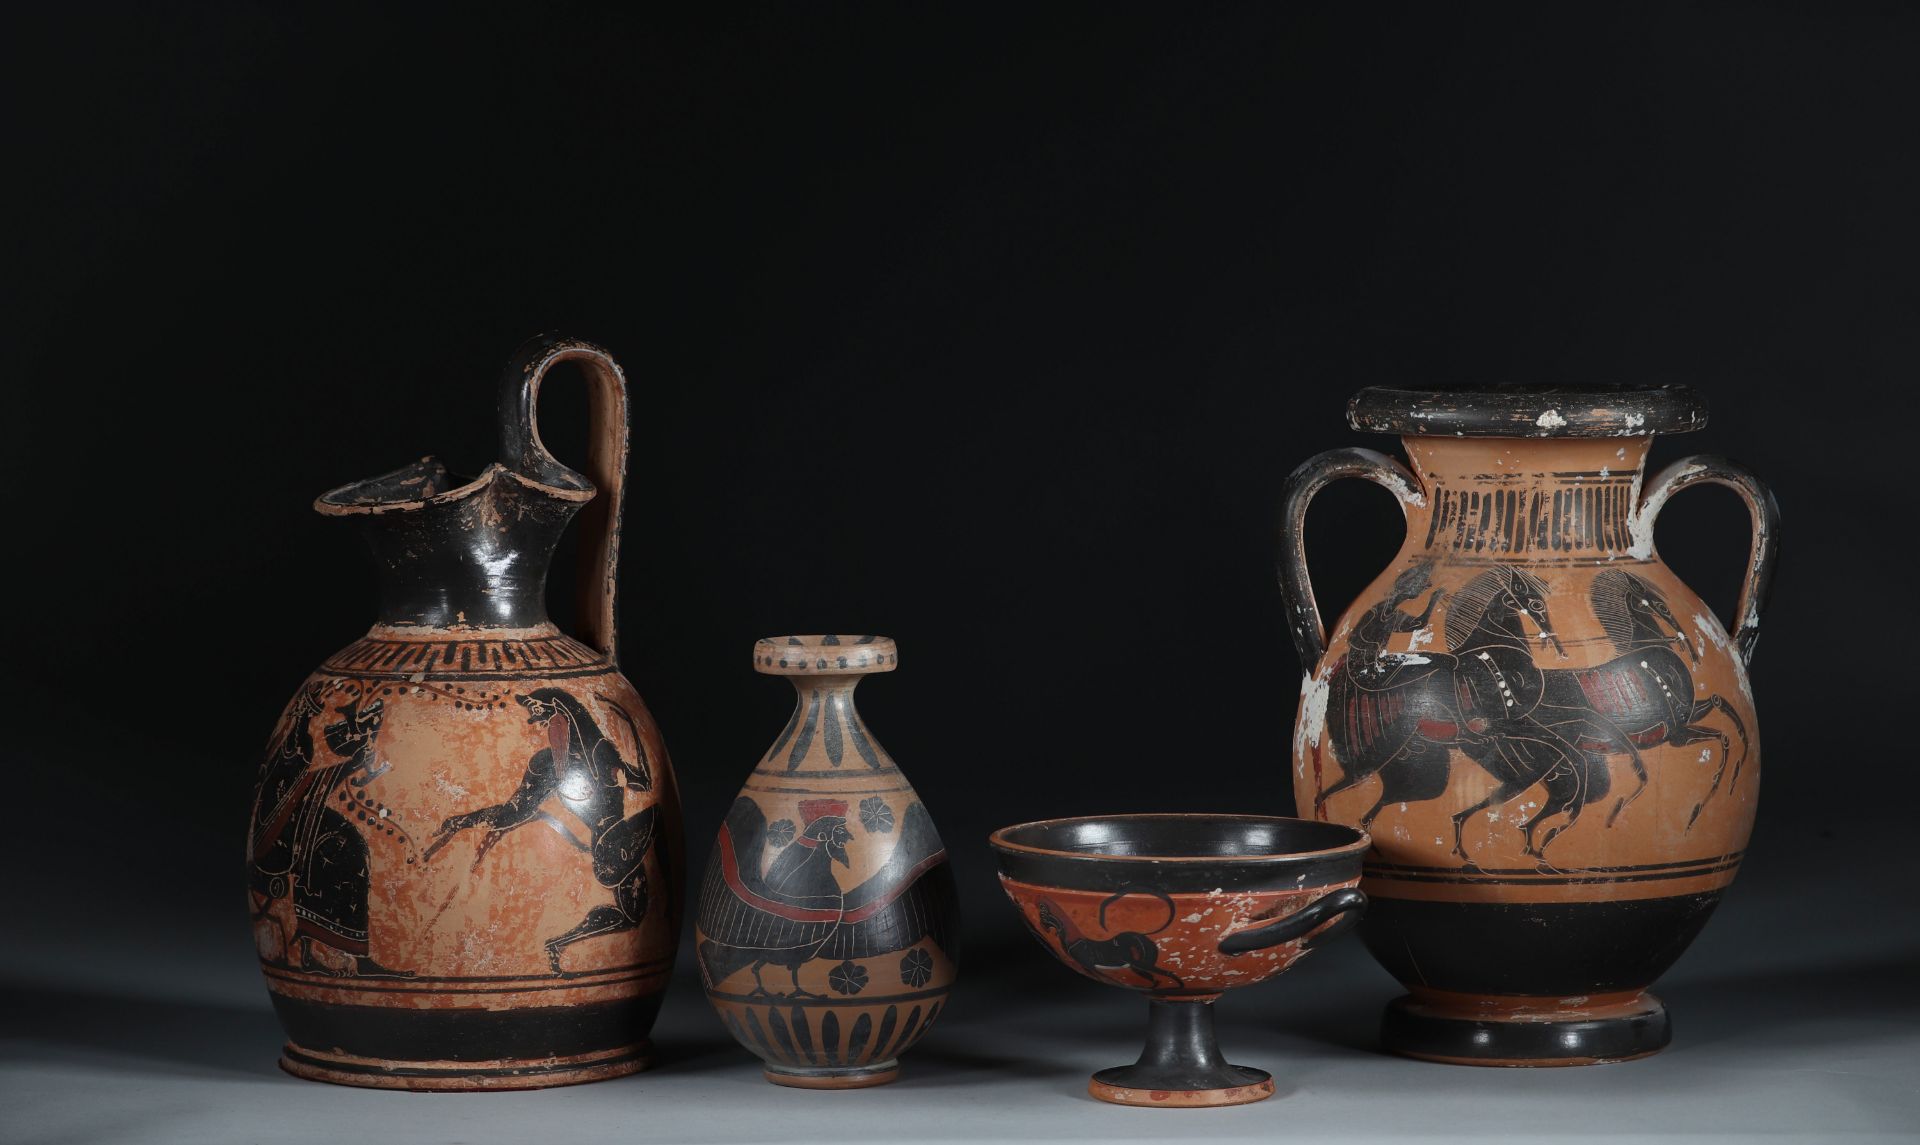 Lot of 4 Greek vases "old style" - Image 2 of 3